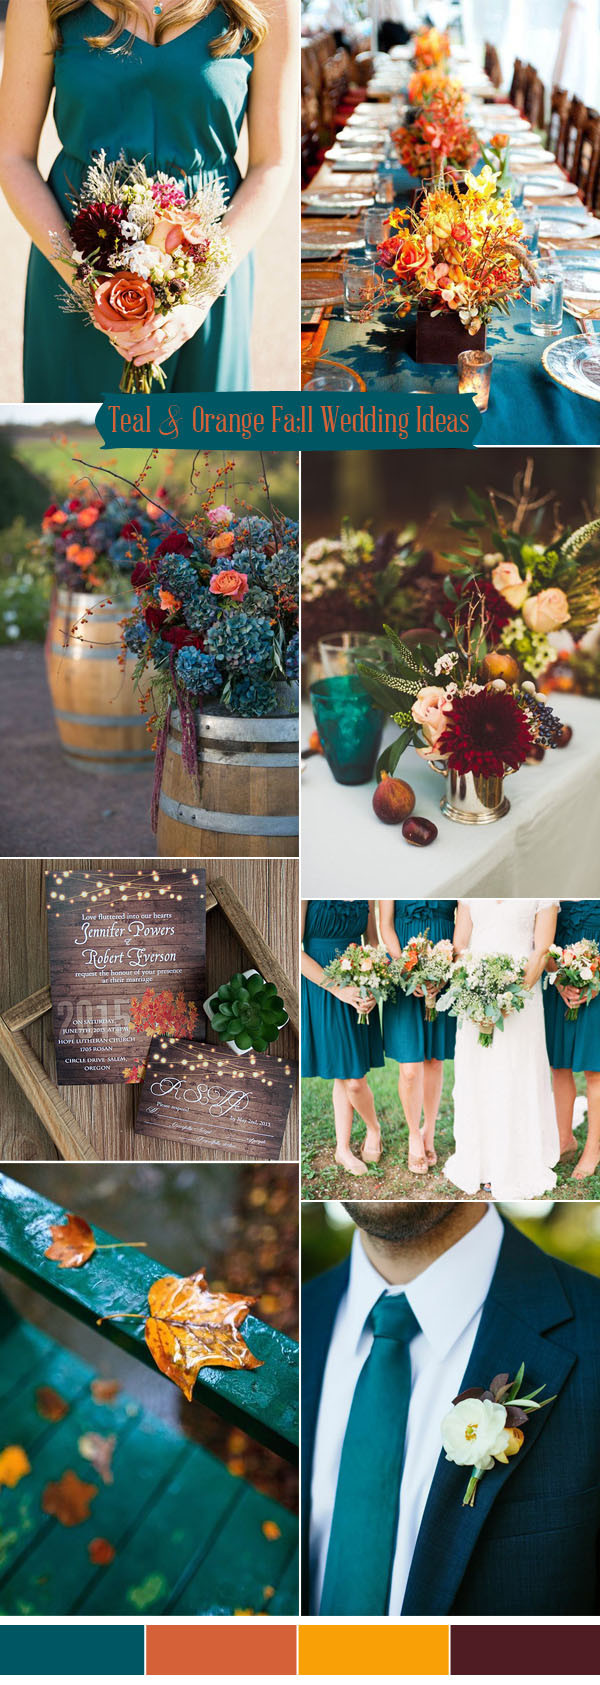 Colors For A Fall Wedding
 Ten Prettiest Shades of Blue for 2017 Wedding Color Ideas